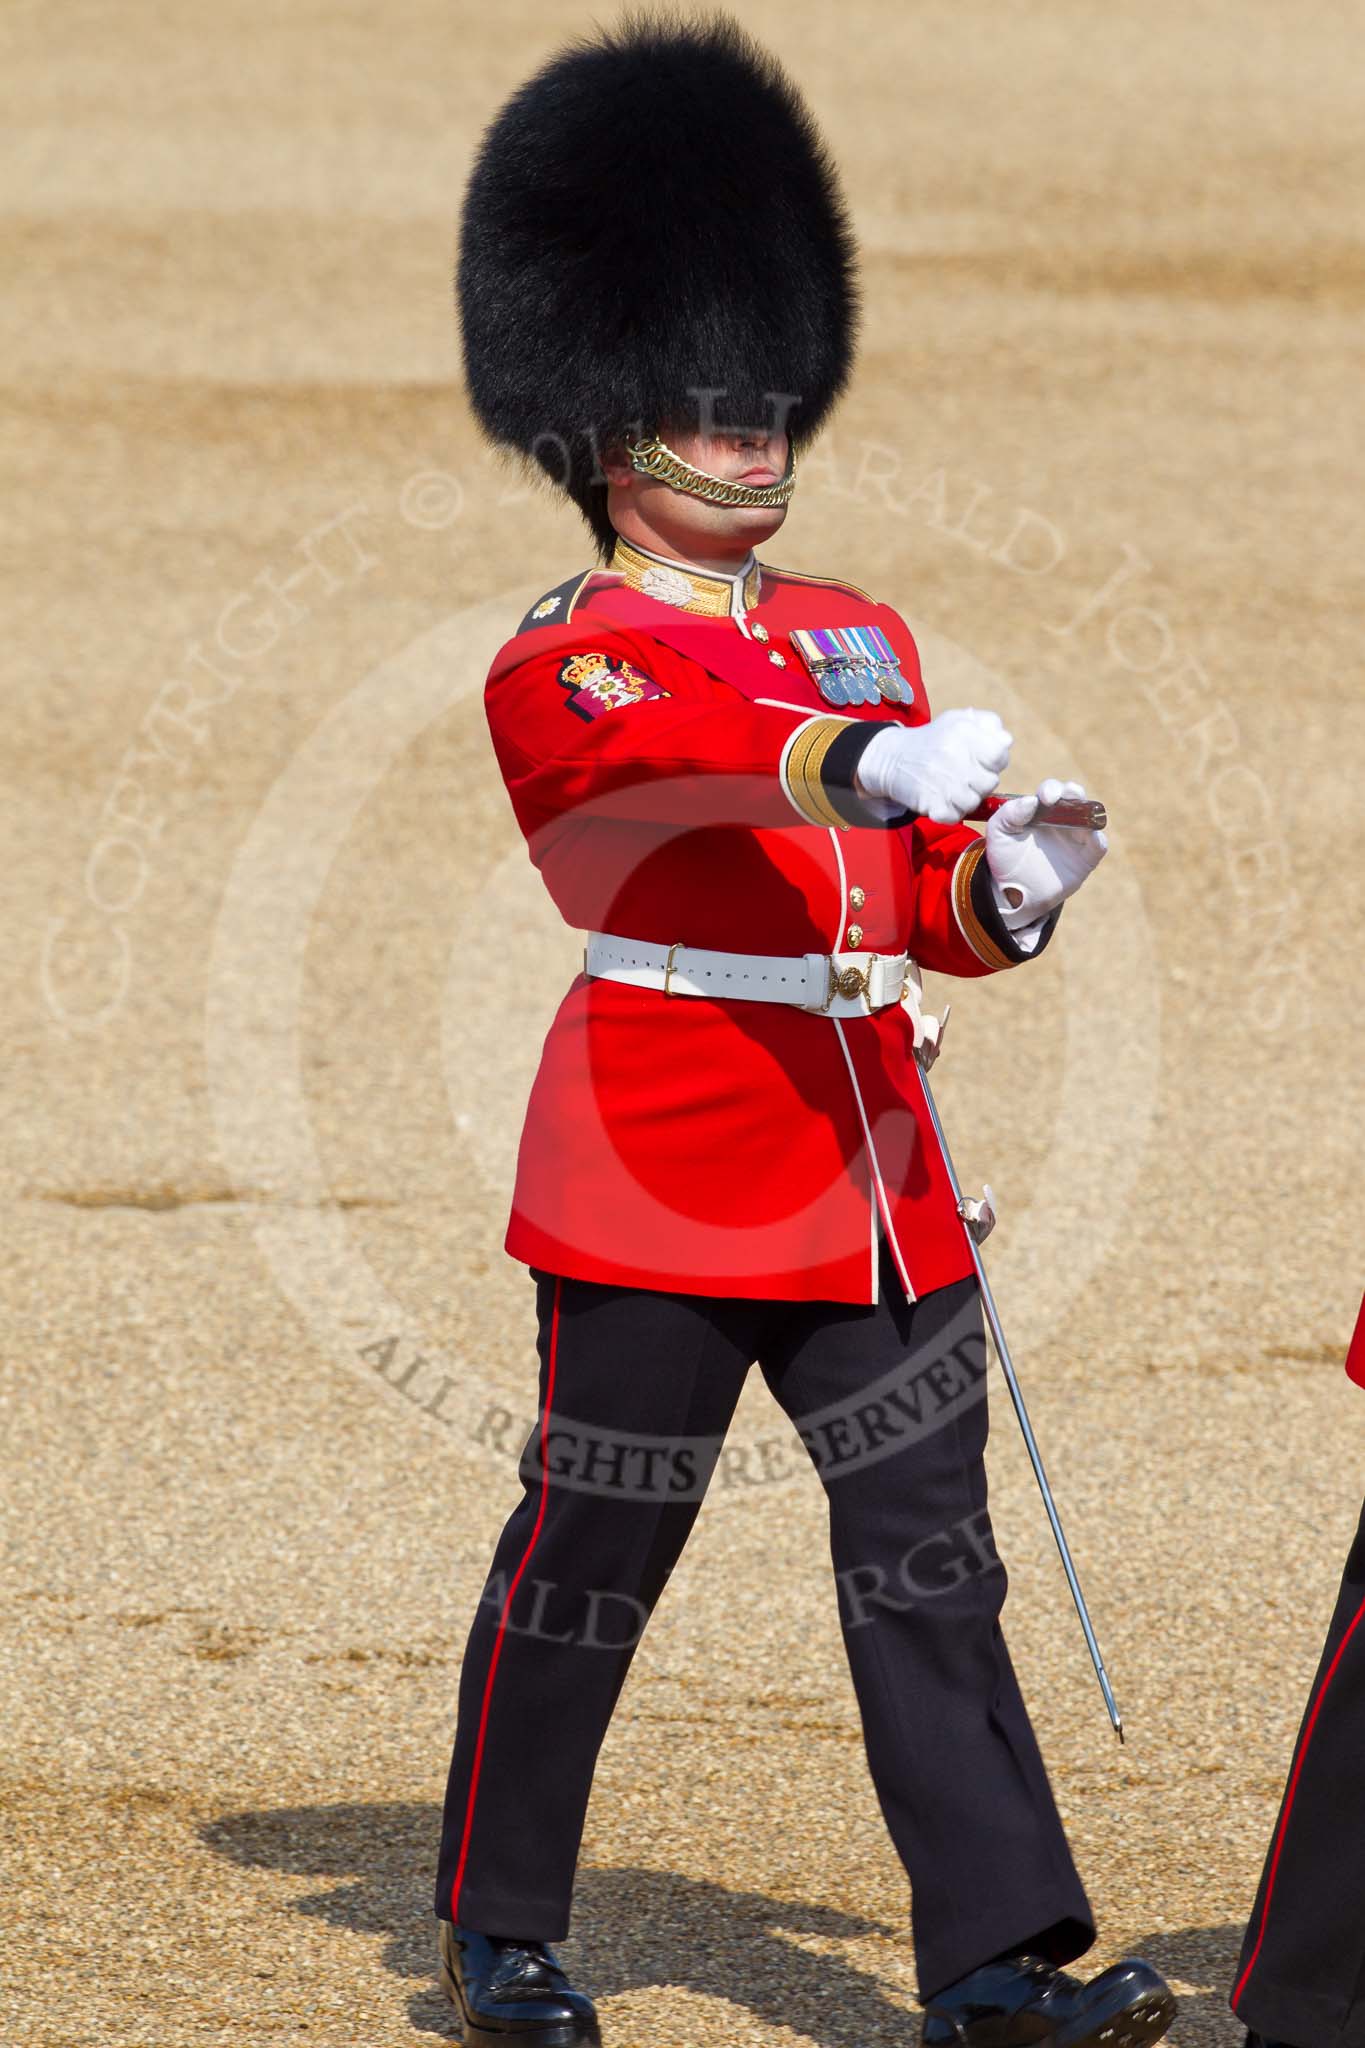 The Colonel's Review 2011: A Company Sergeant Major of the Scots Guards marching across the parade ground..
Horse Guards Parade, Westminster,
London SW1,

United Kingdom,
on 04 June 2011 at 09:40, image #4